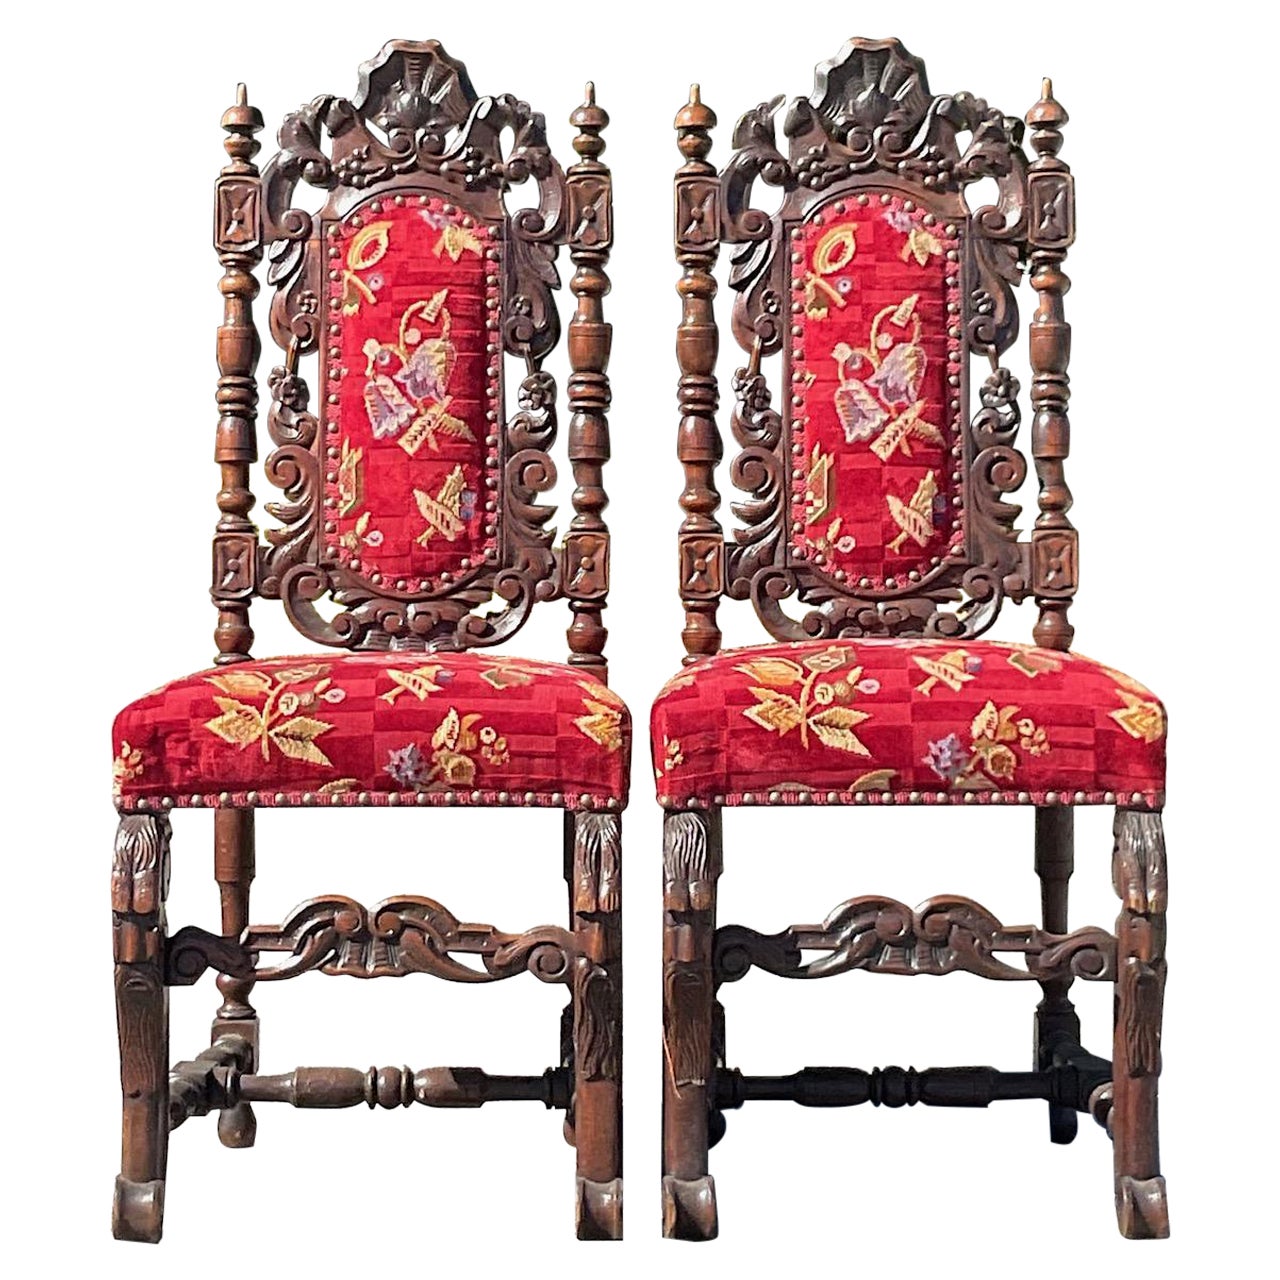 Vintage Gothic Carved Wood Dining Chairs - a Pair For Sale